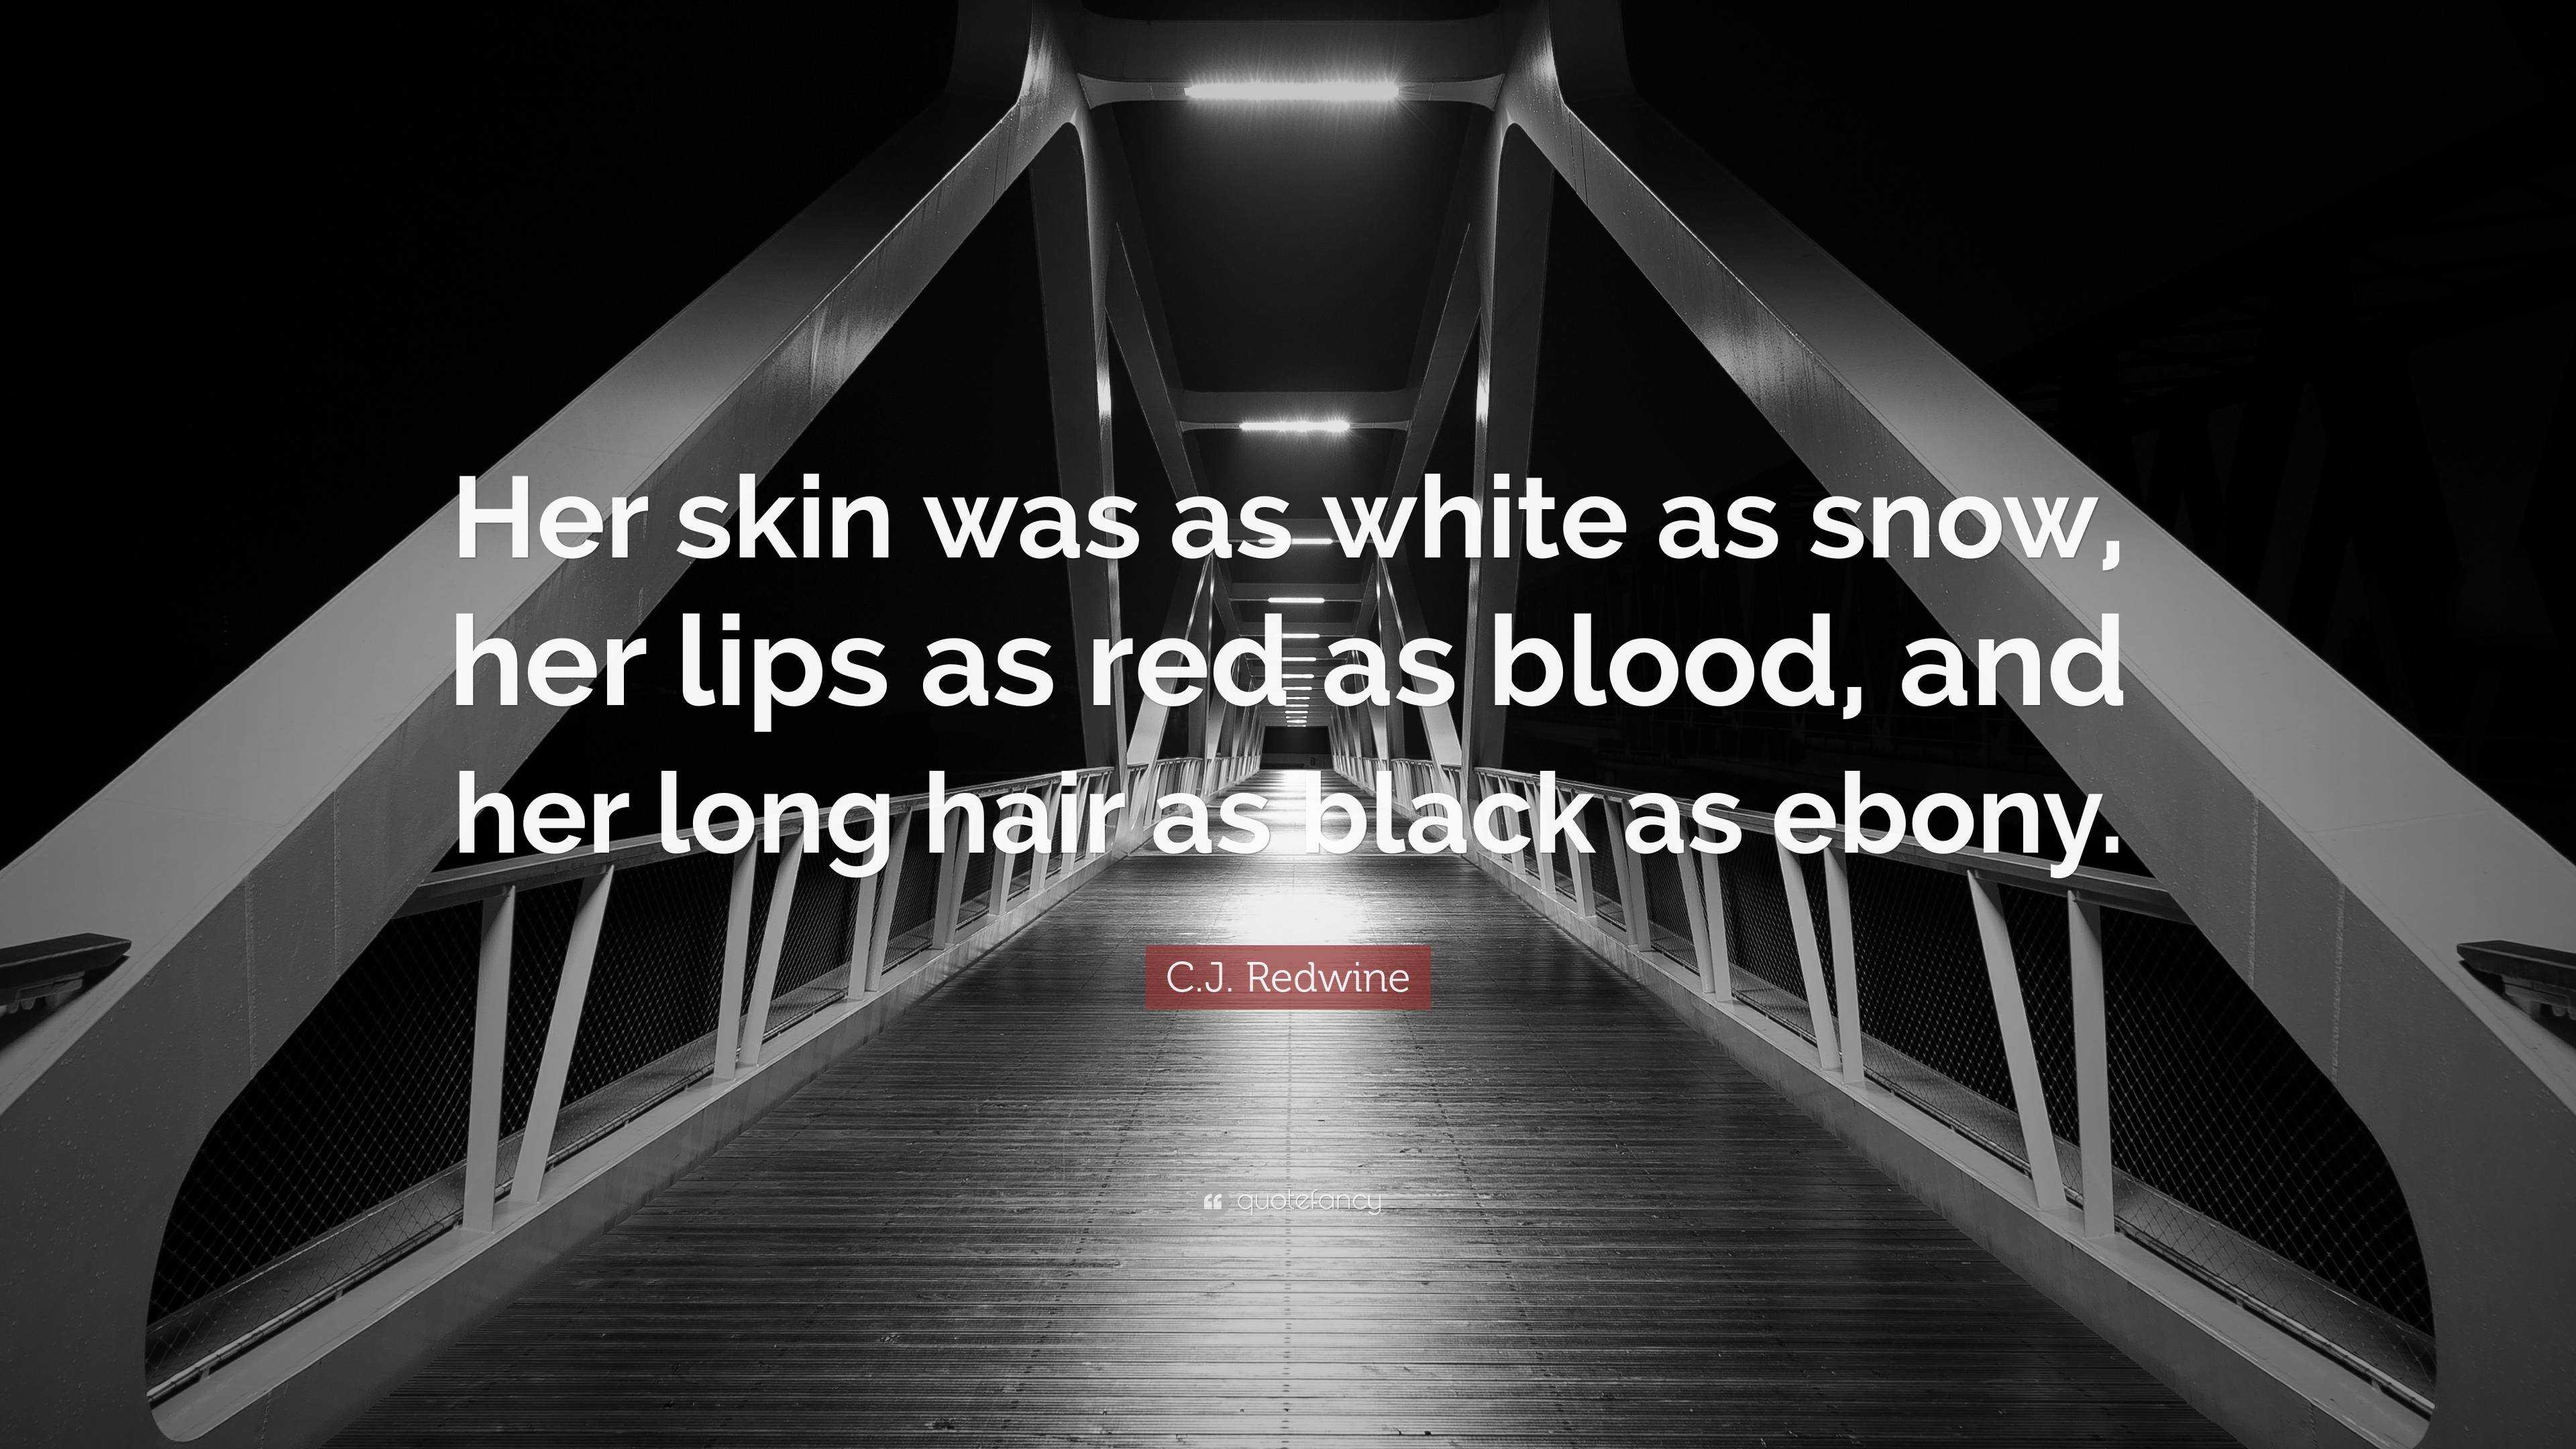 Skin white as snow, lips red as blood, and hair black as ebony